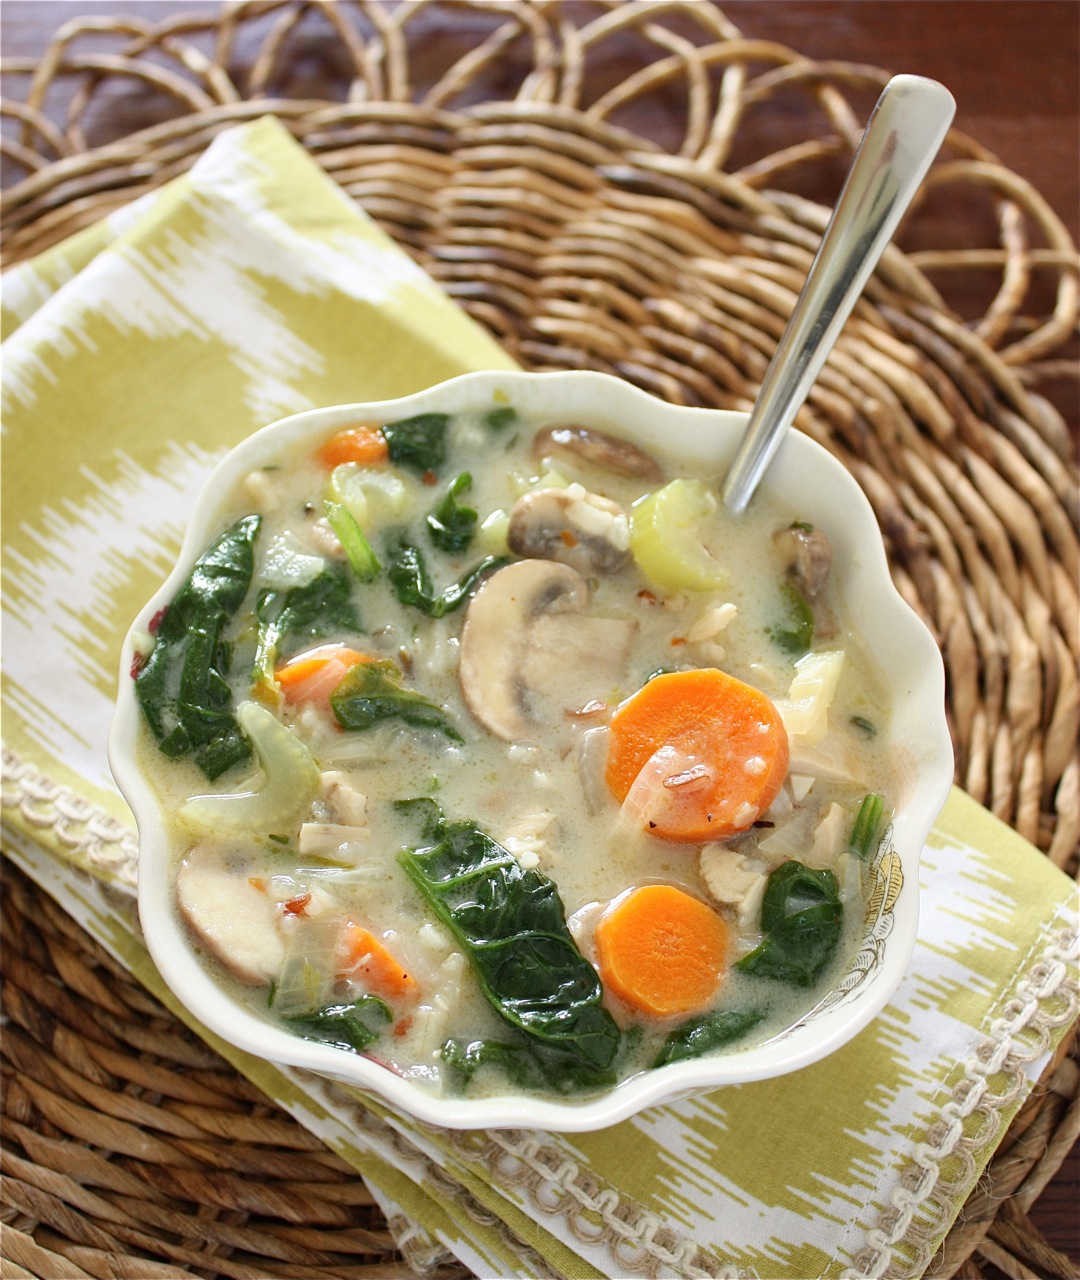 Chicken, Mushroom and Wild Rice Soup with Spinach